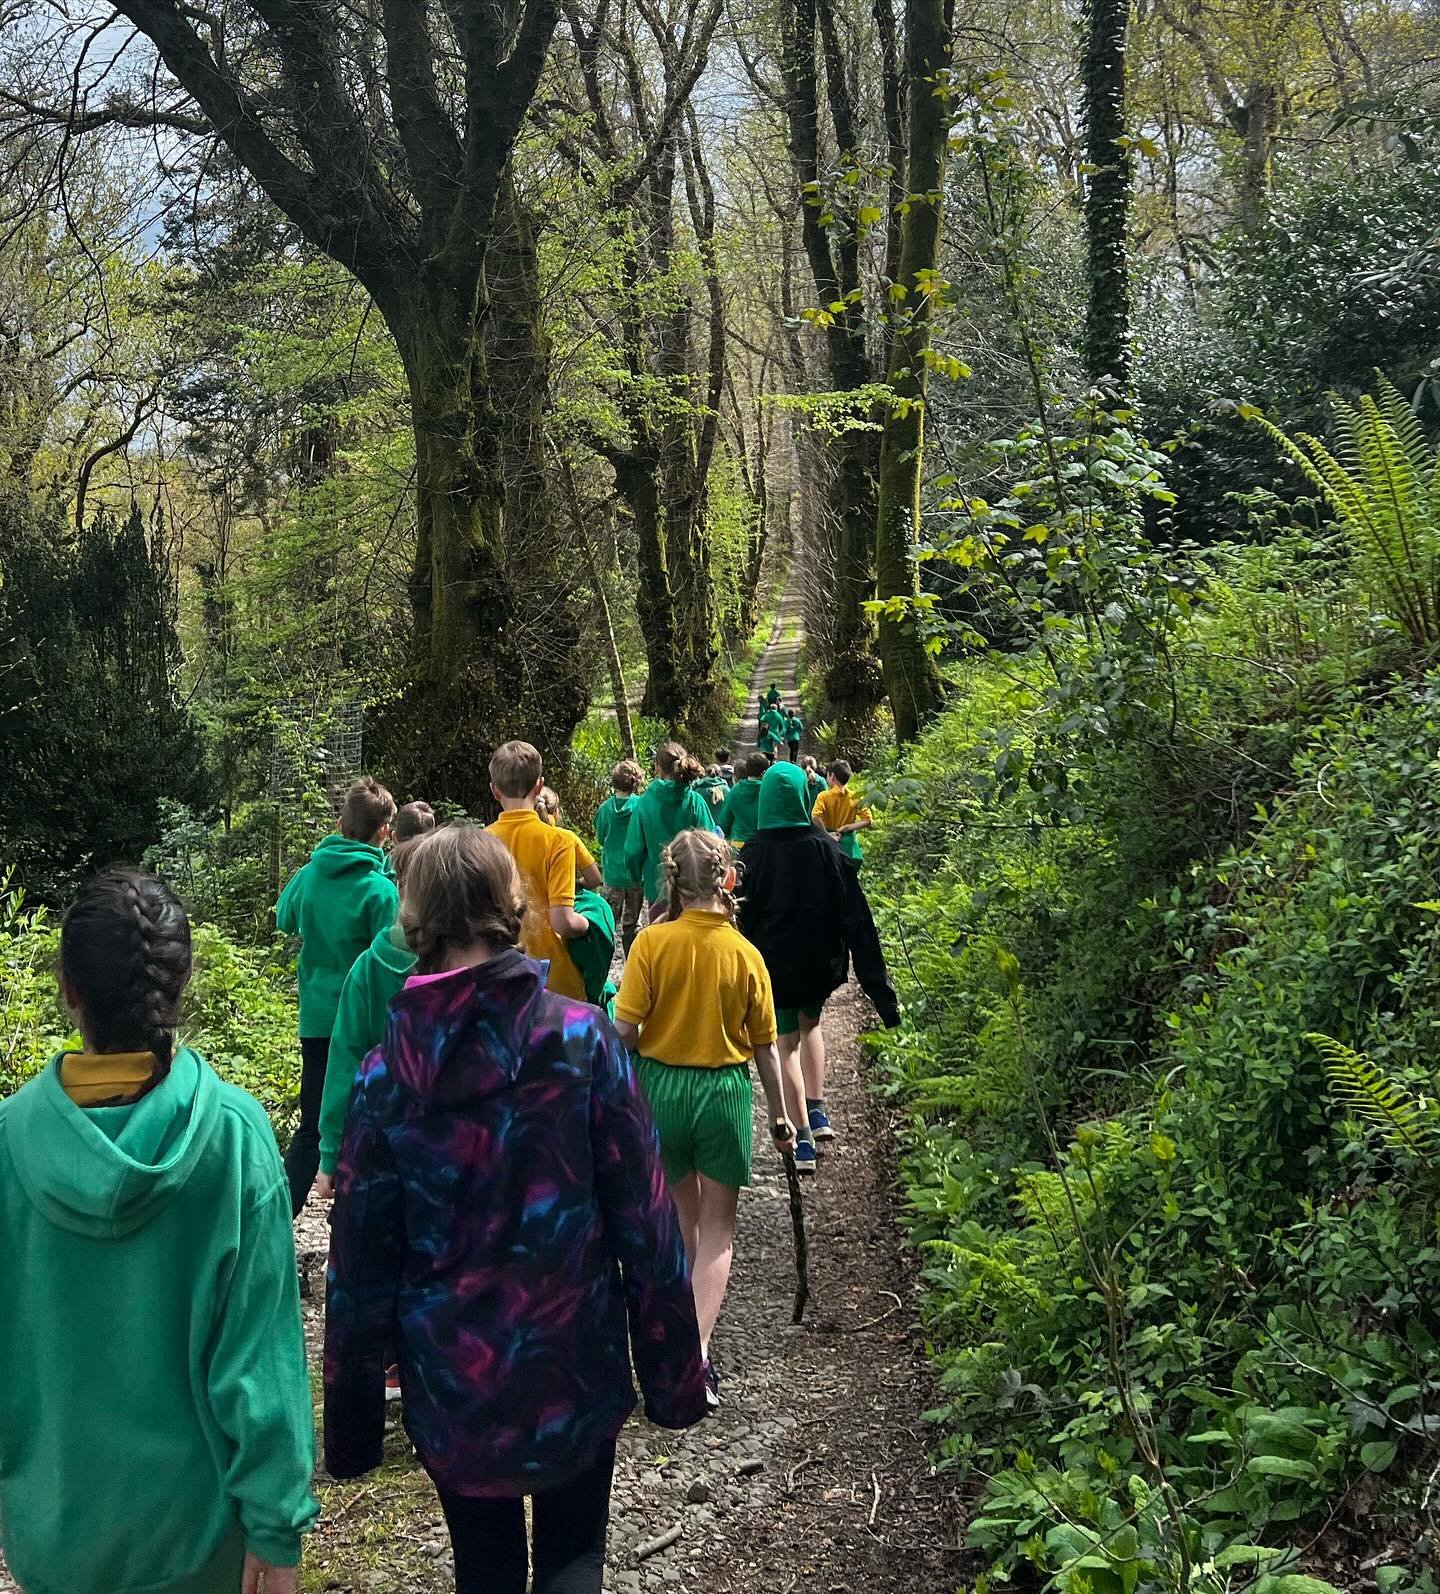 Welcoming young explorers...

Our woodland gardens have been filled with laughter and lively chatter recently as we have had the pleasure of welcoming children from local primary schools to help us with our estate bird survey!

Guided by experts Davi